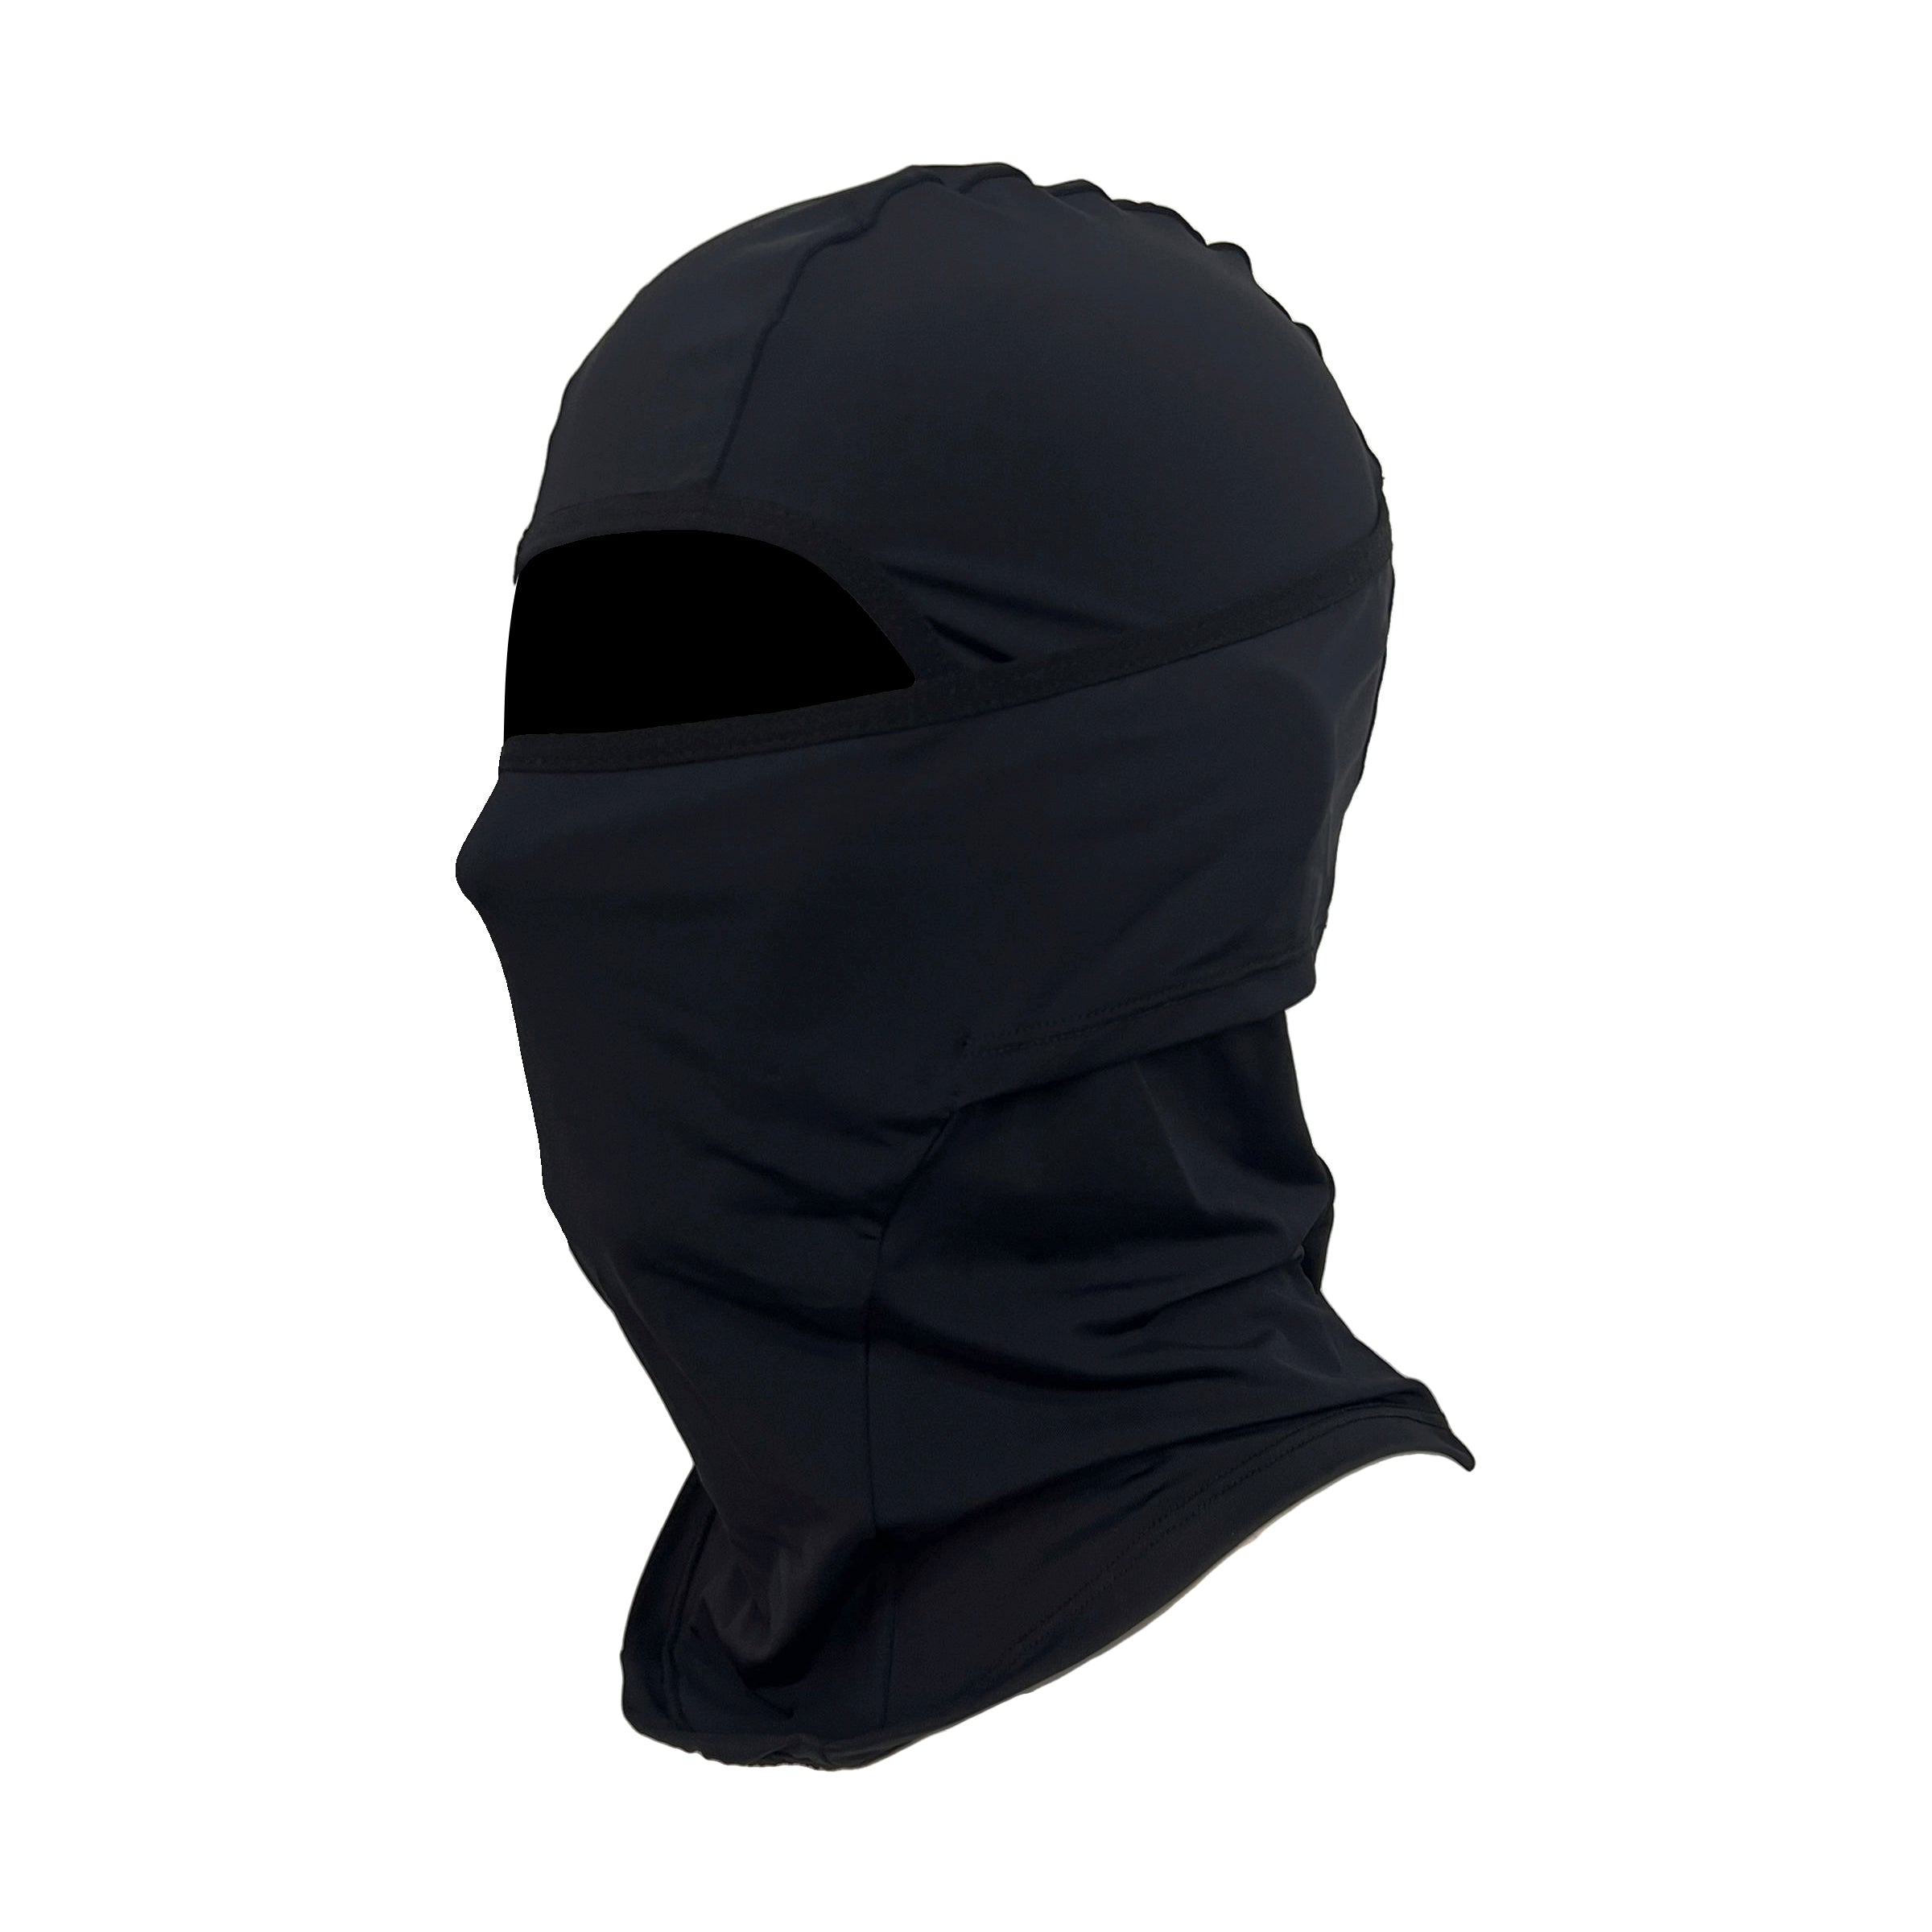 What is a Balaclava?